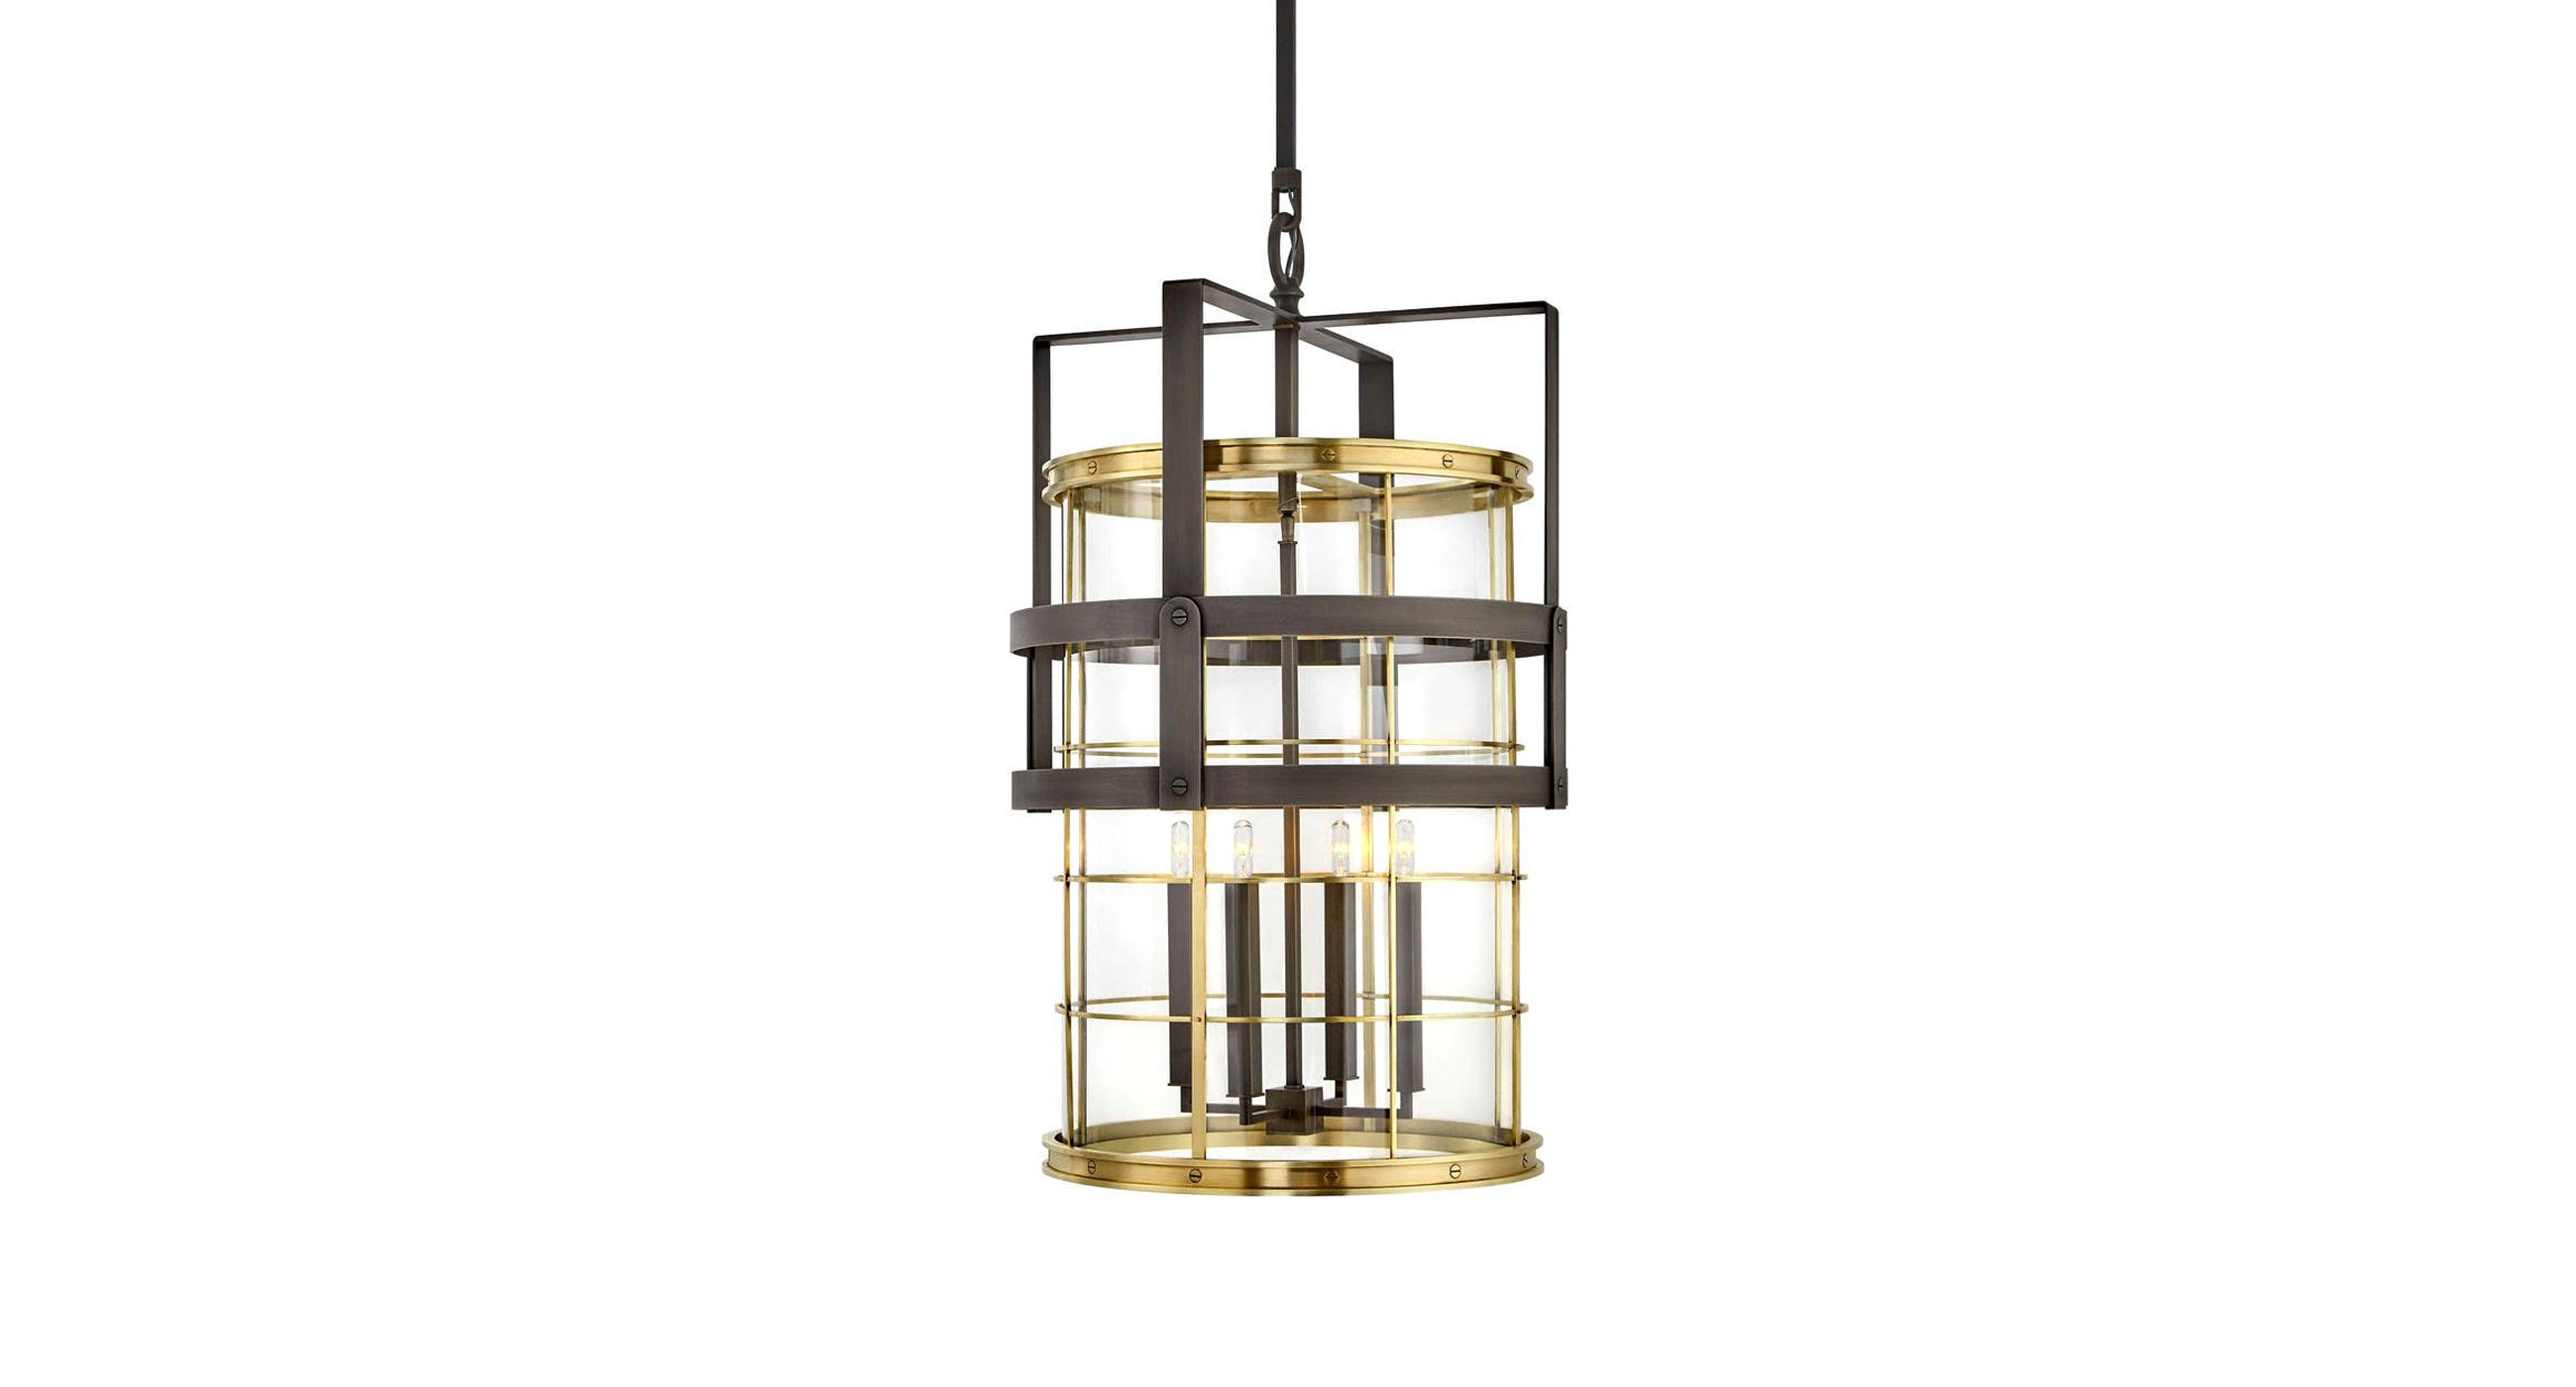 Oro Bianco - The Lighting Collection